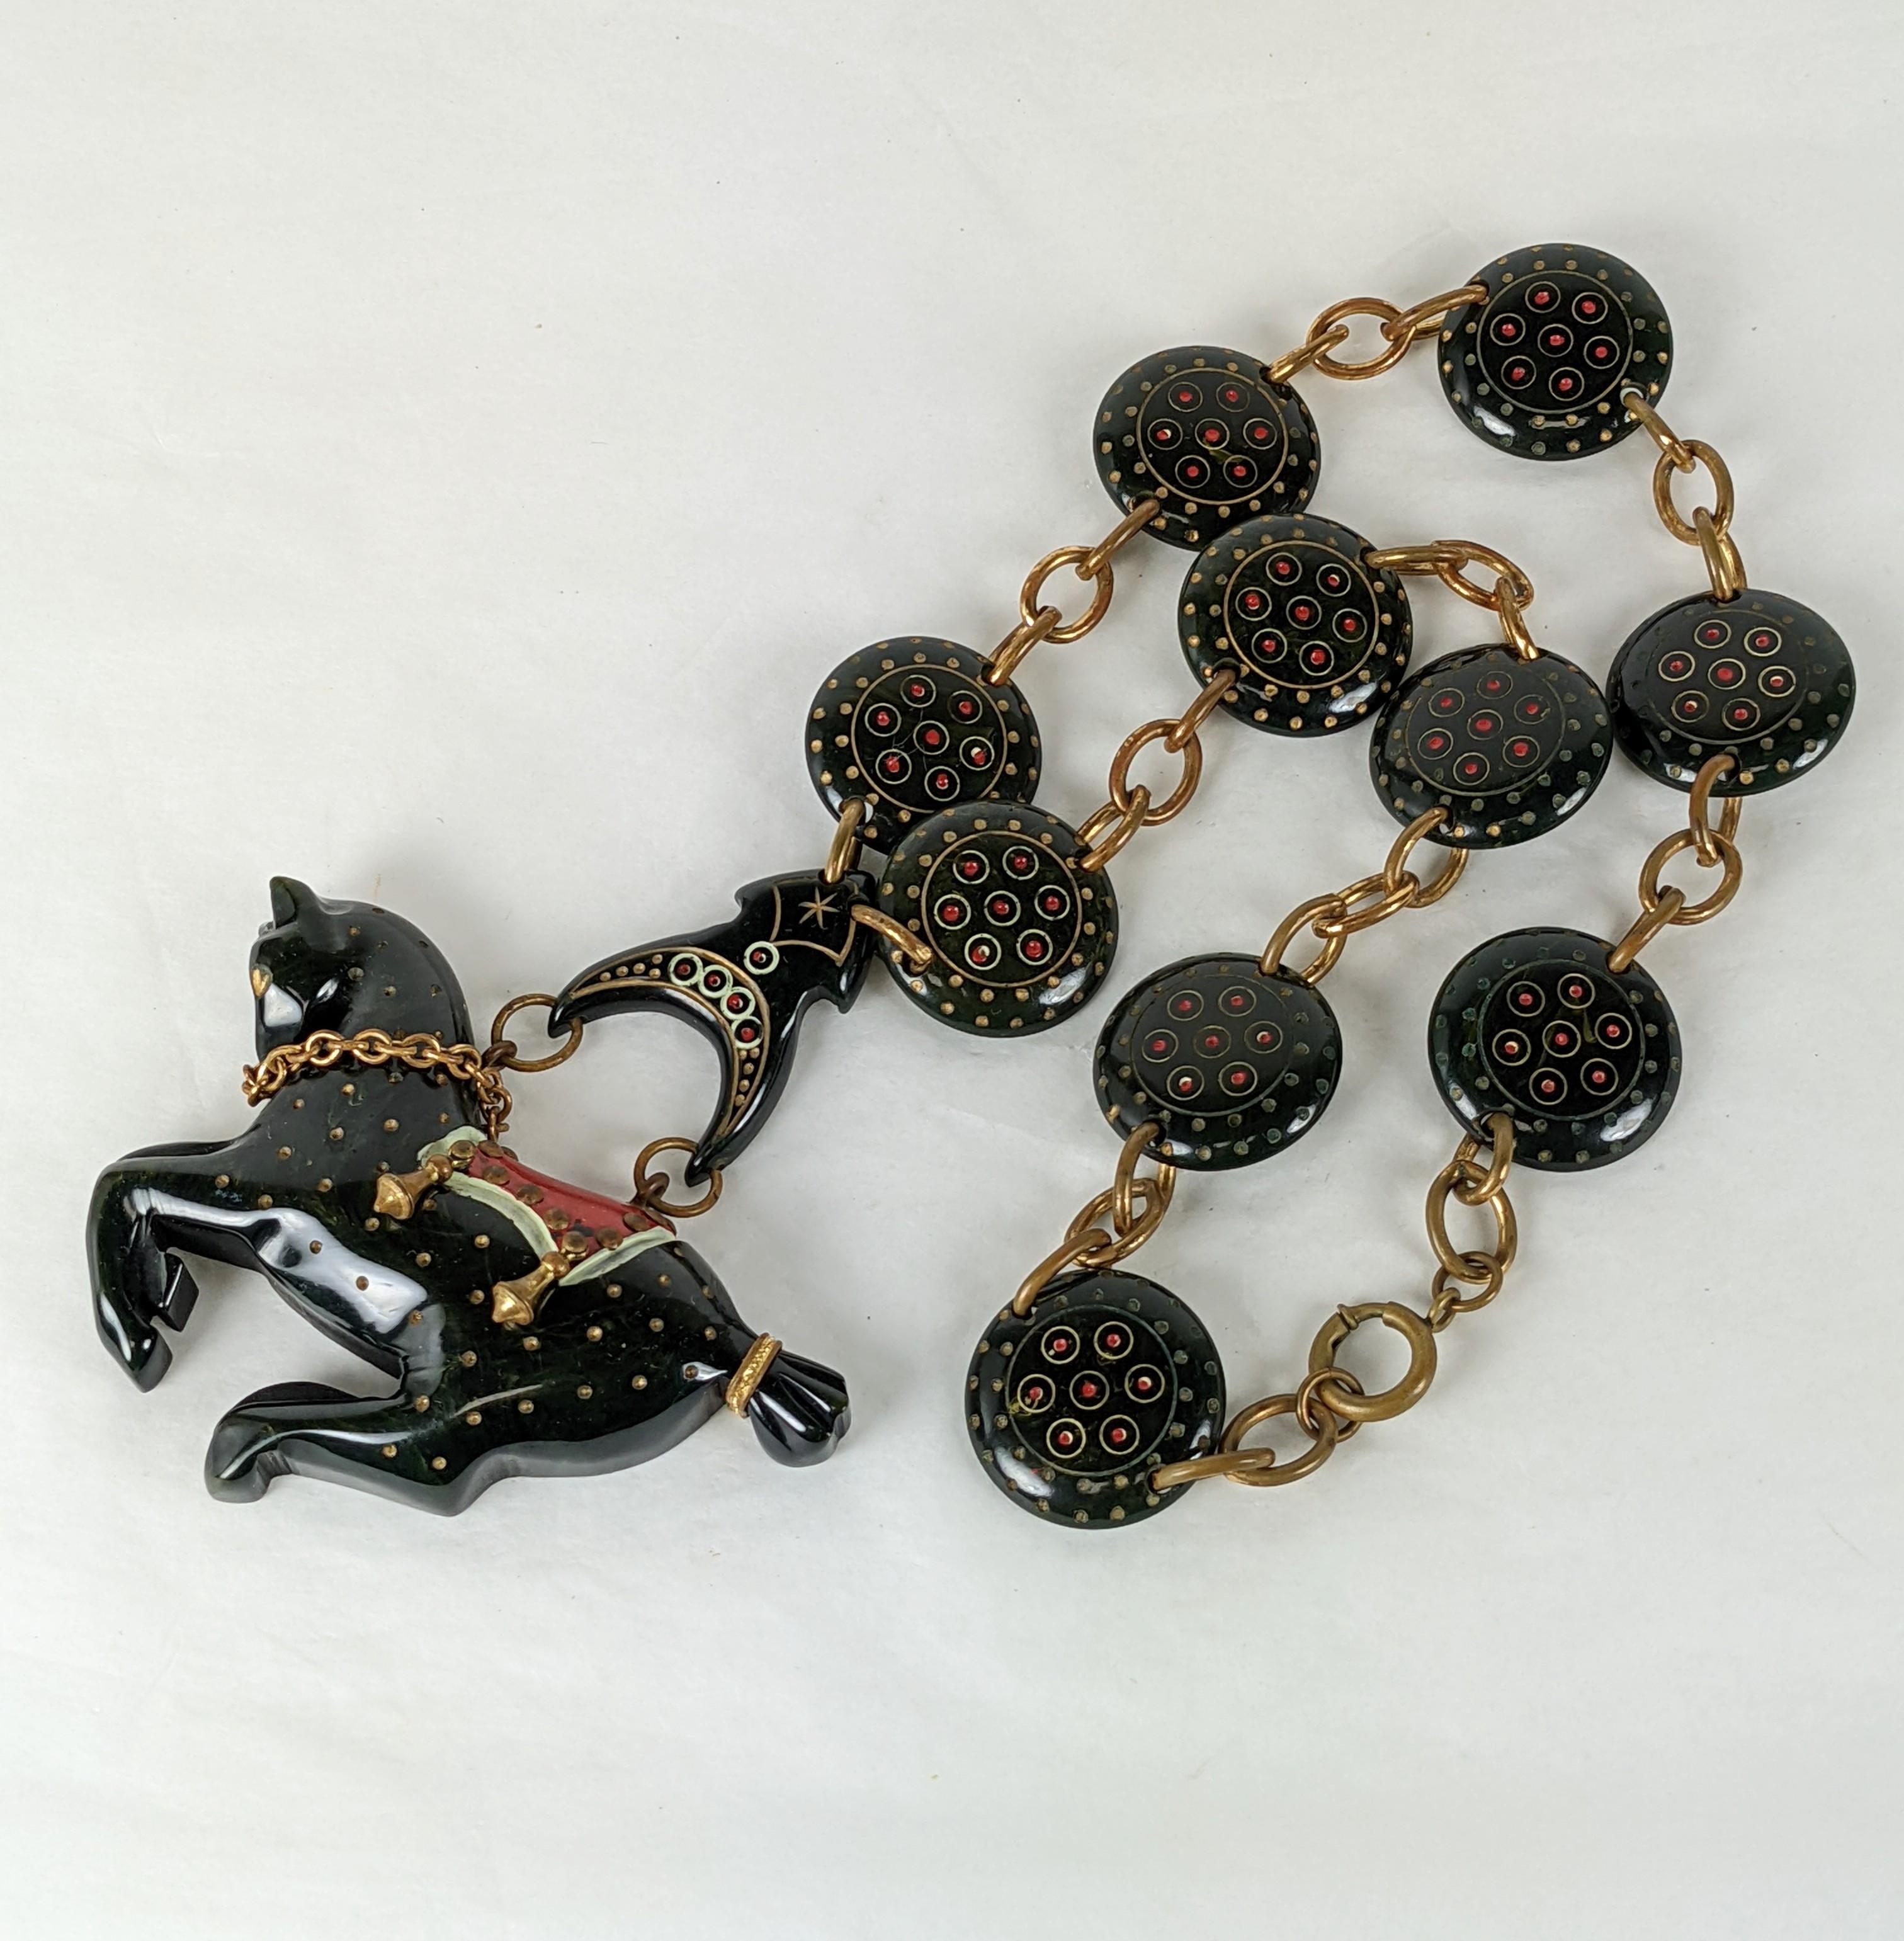 Rare Art Deco Bakelite Carousel Horse Necklace In Excellent Condition For Sale In New York, NY